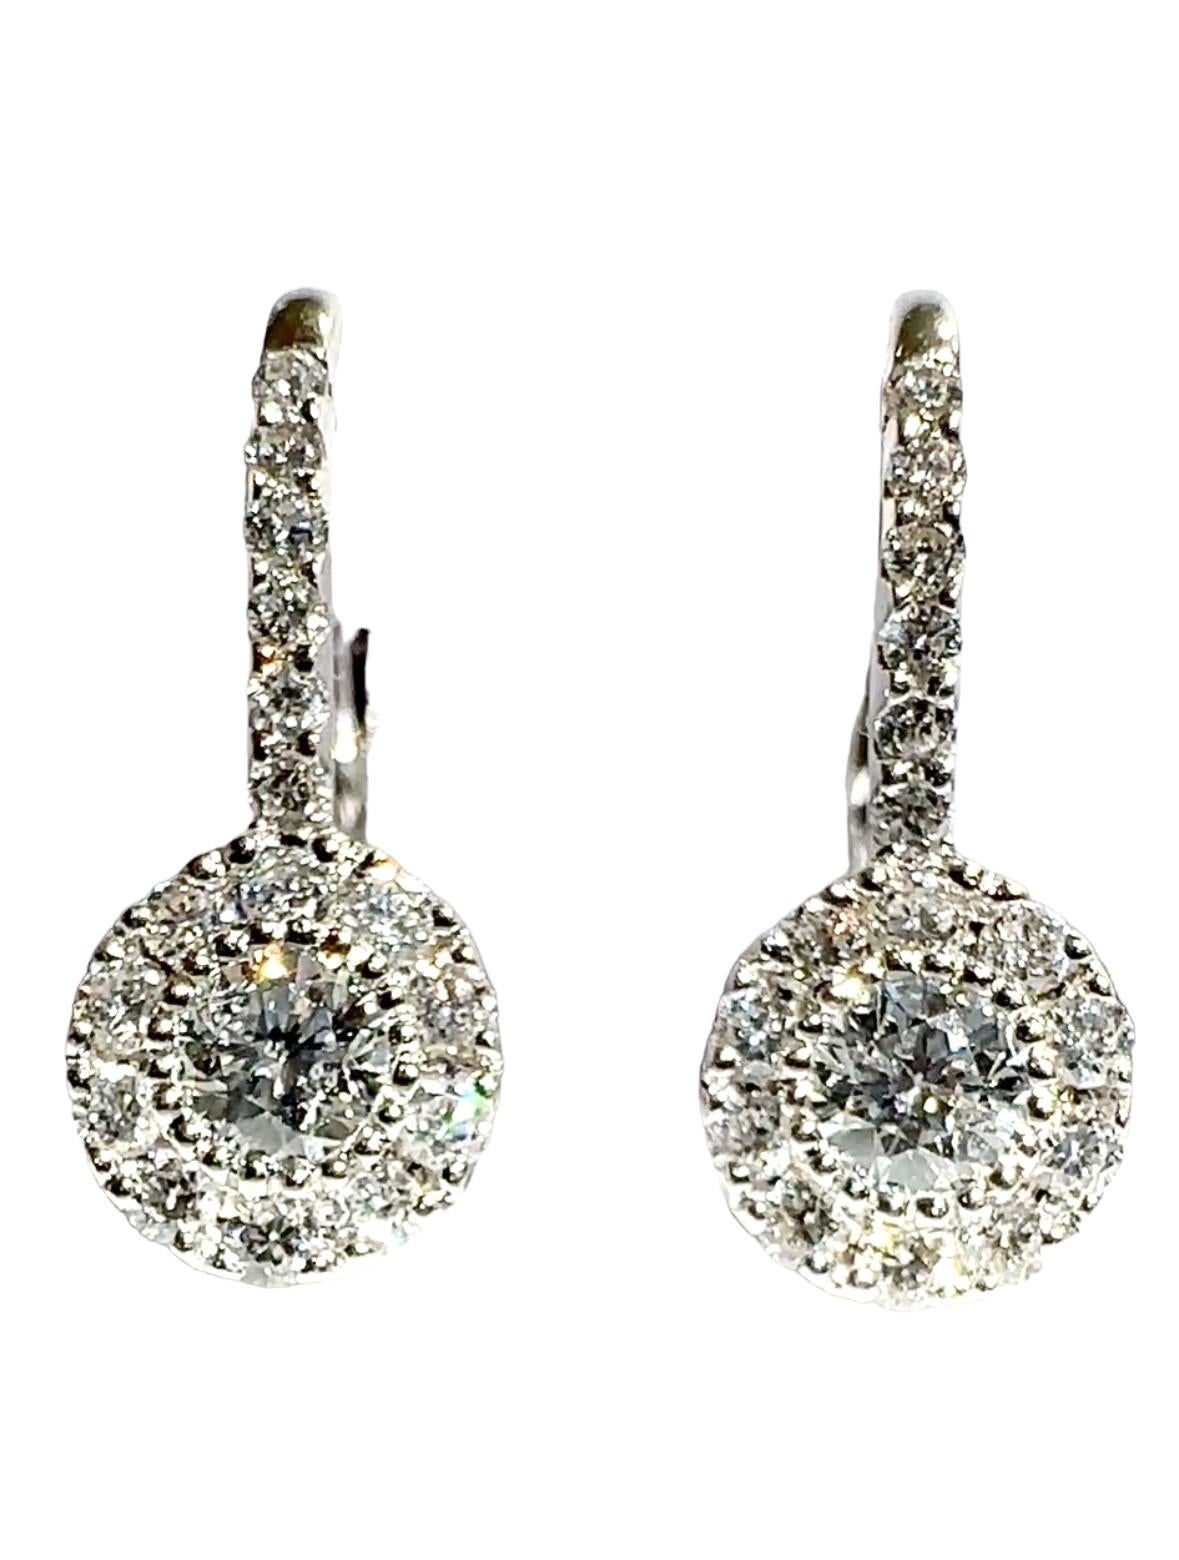 Gregg Ruth 18k White Gold Diamond Dangle Earrings With Appraisal In Excellent Condition For Sale In Eagan, MN